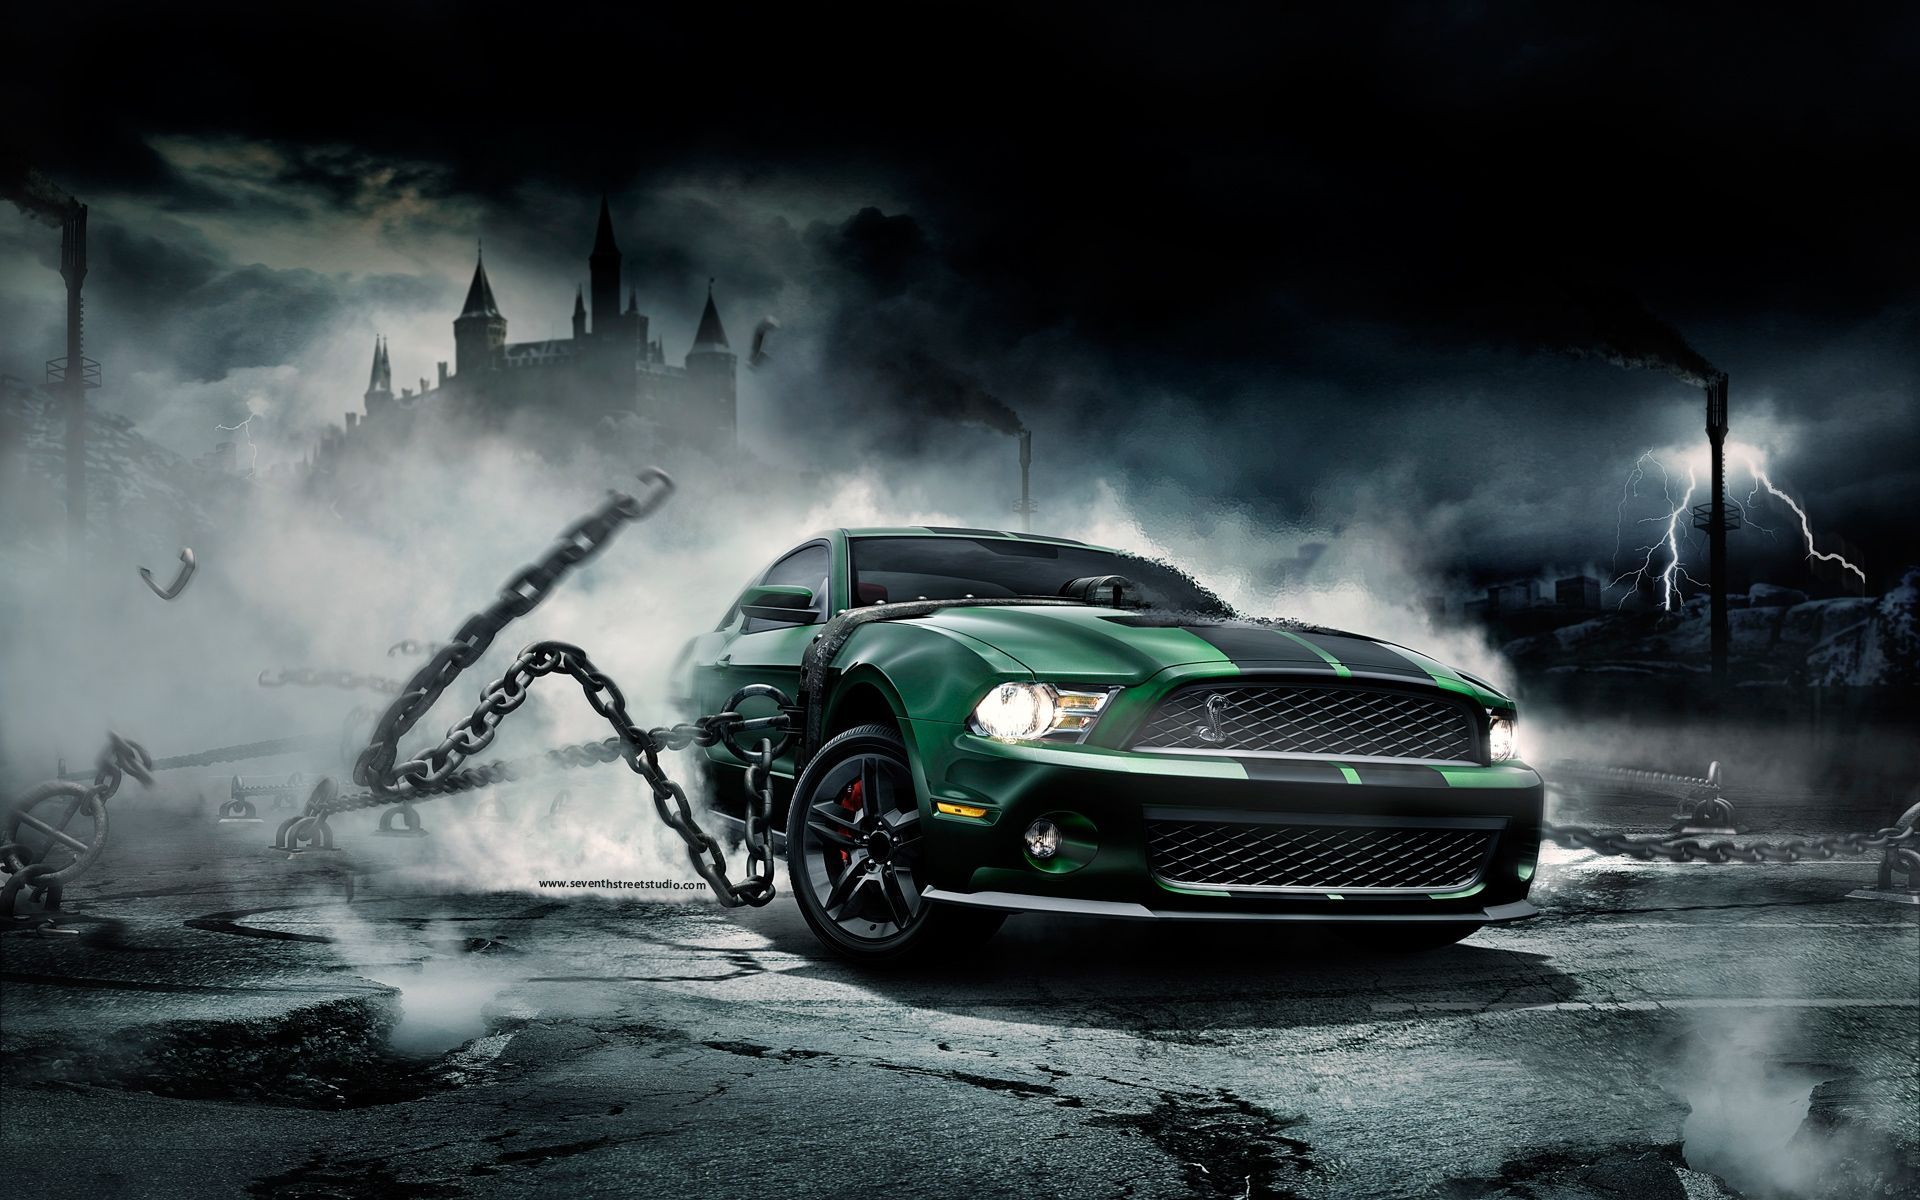 636 Ford Mustang HD Wallpapers | Backgrounds - Wallpaper Abyss